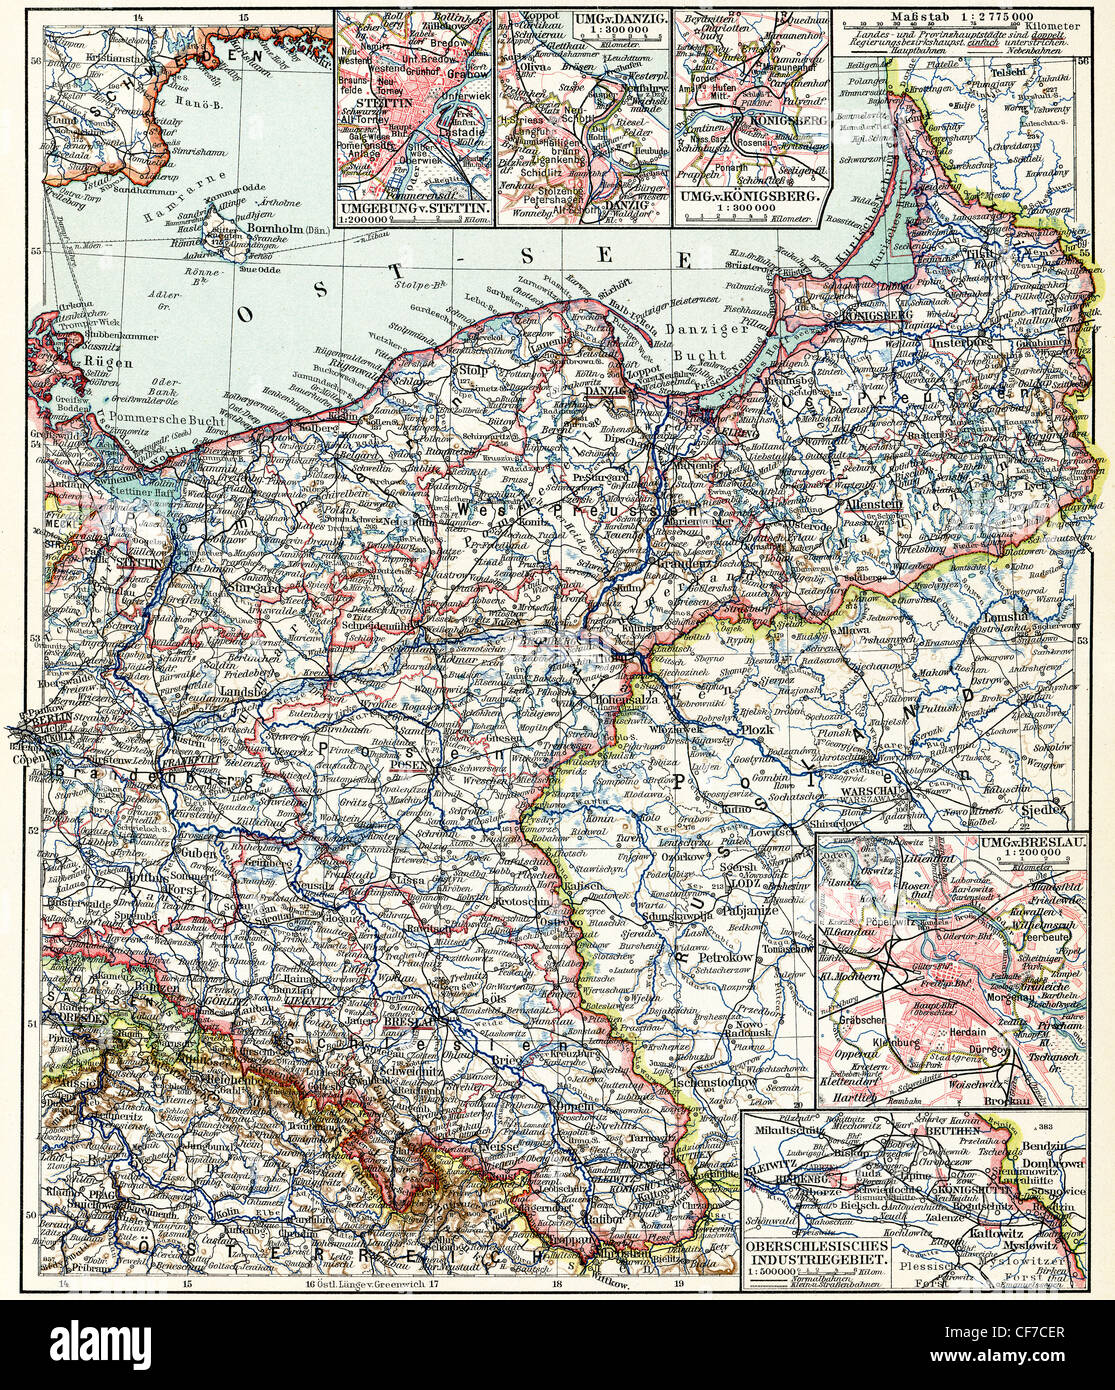 Map of the North-East Germany. Publication of the book 'Meyers Konversations-Lexikon', Volume 7, Leipzig, Germany, 1910 Stock Photo